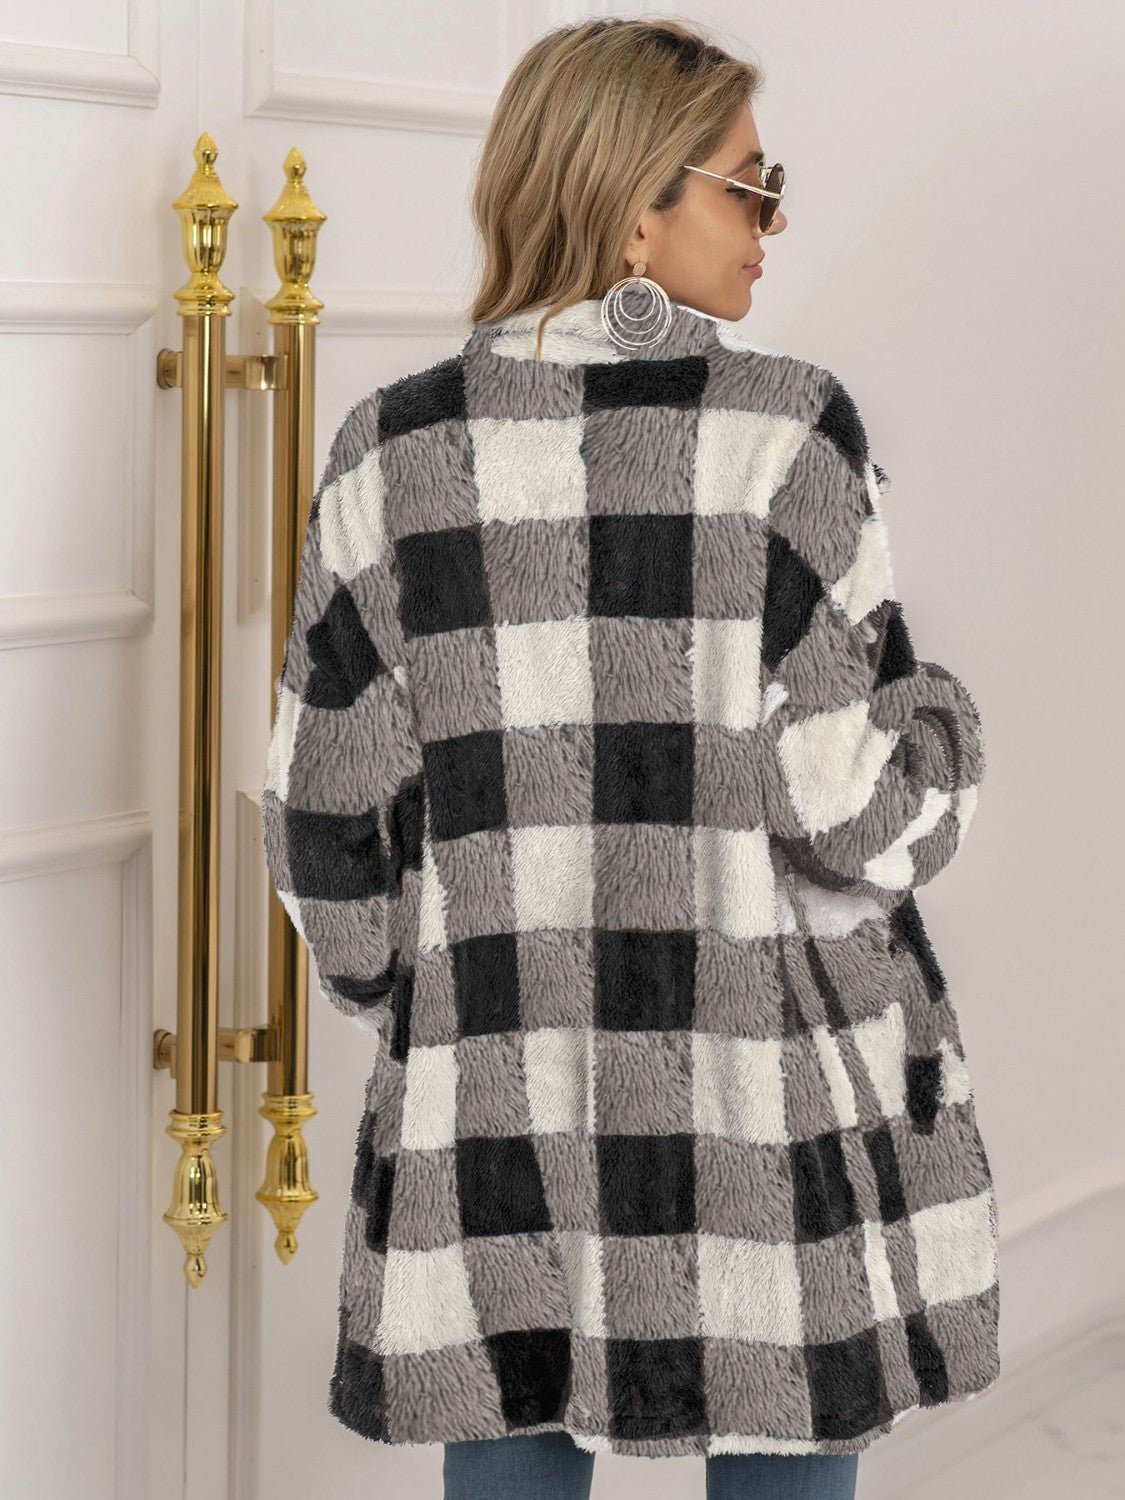 Plaid Collared Neck Longline Coat - Fashion Girl Online Store